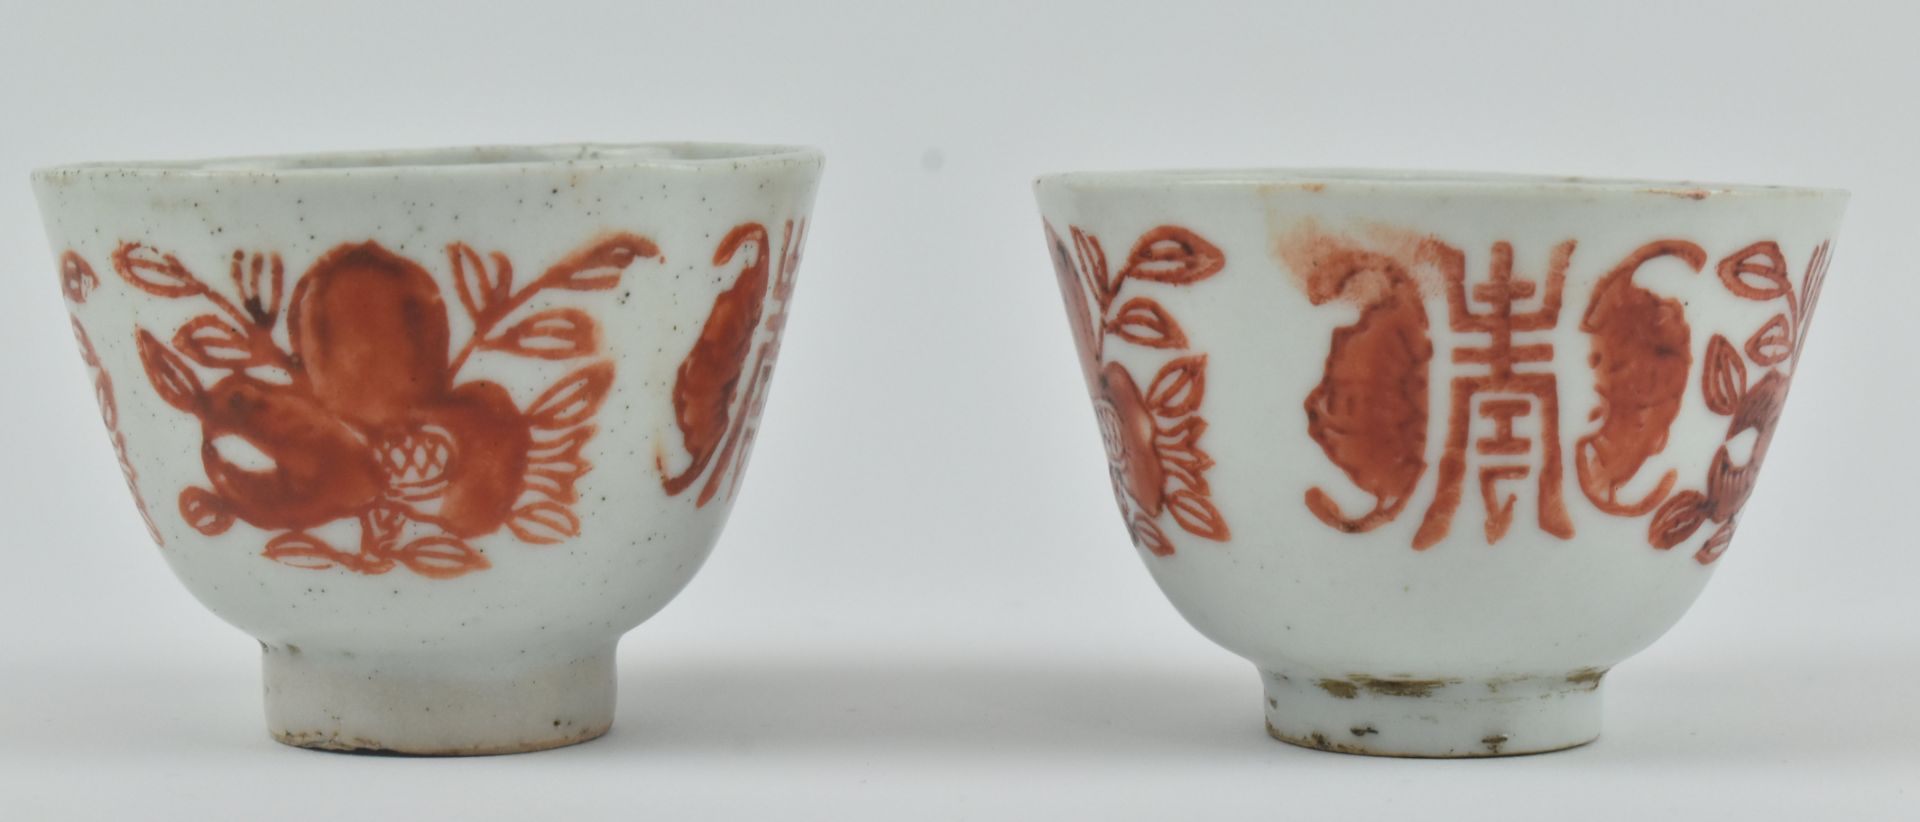 GROUP OF 4 GUANGXU "SAN DUO" CUPS AND PLATES 光绪 “三多”茶杯盘子 - Image 6 of 8